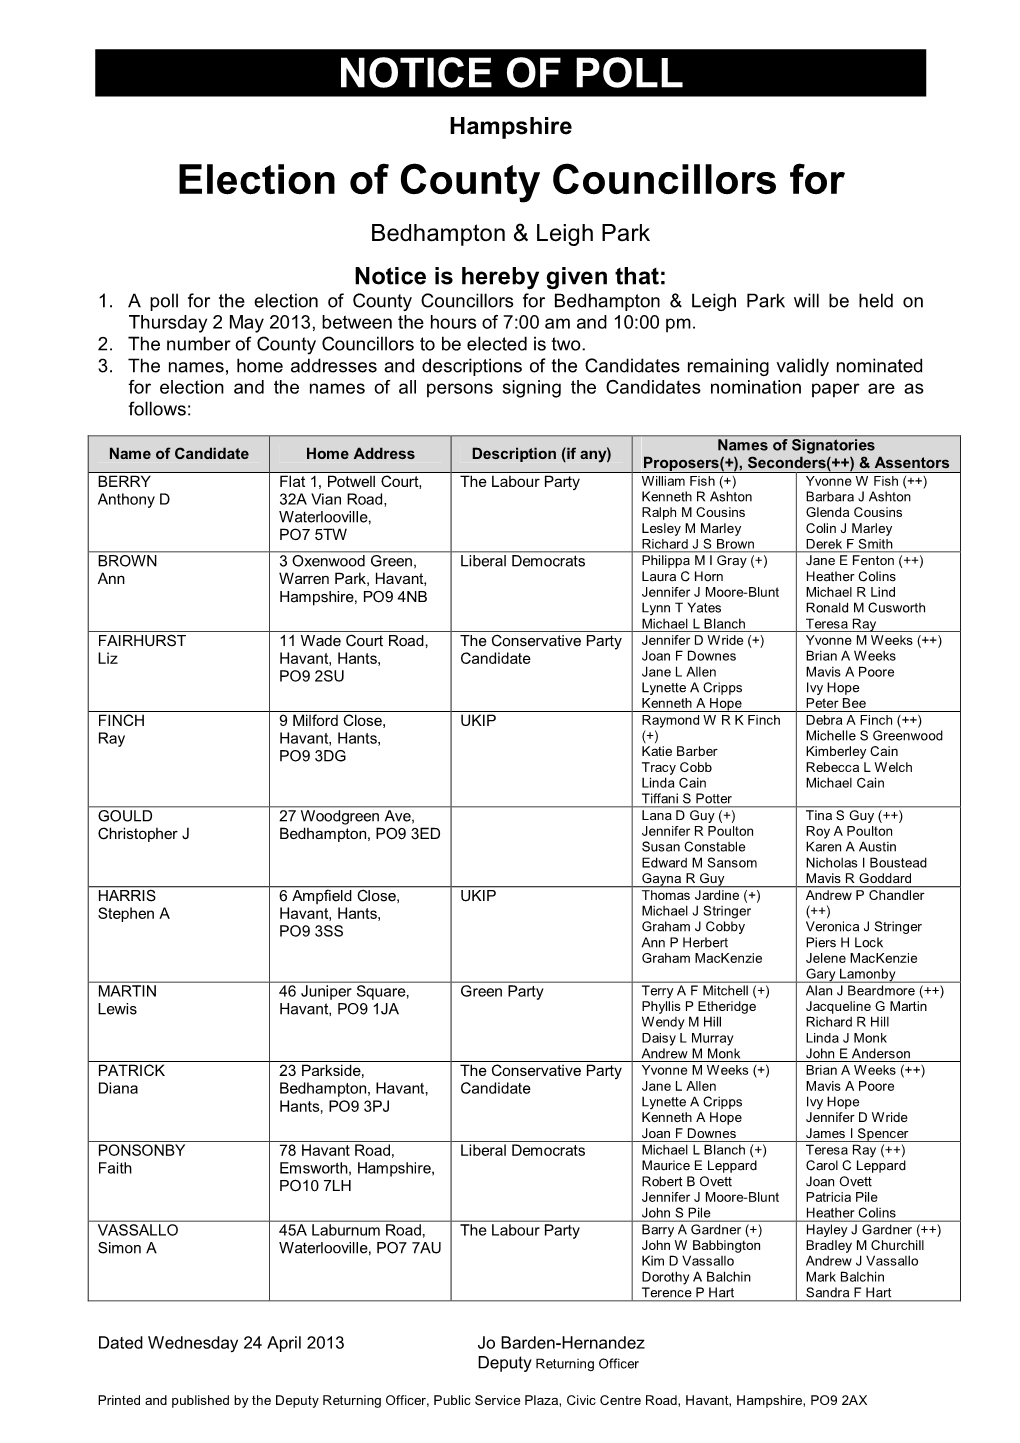 NOTICE of POLL Election of County Councillors